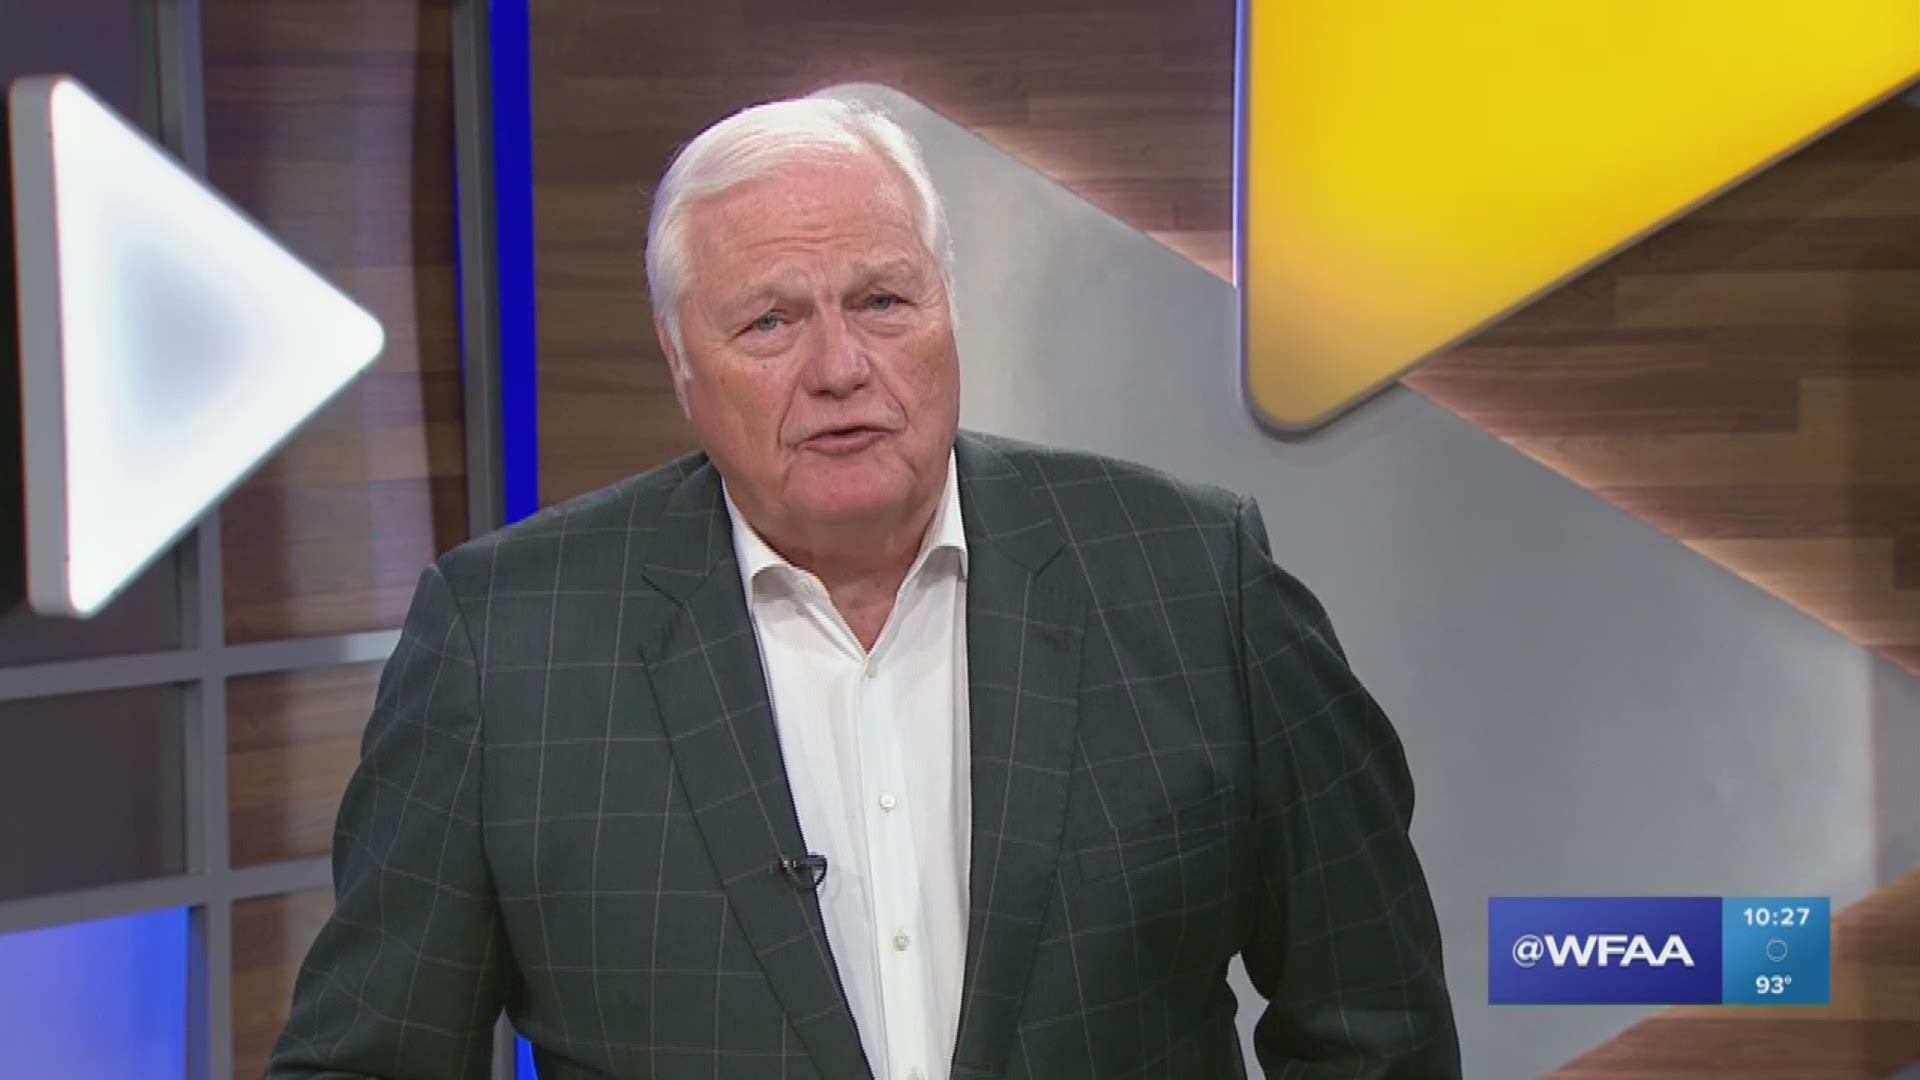 Dale Hansen gives an Unplugged after fans boo Colts quarterback Andrew Luck following his announcement he's retiring.